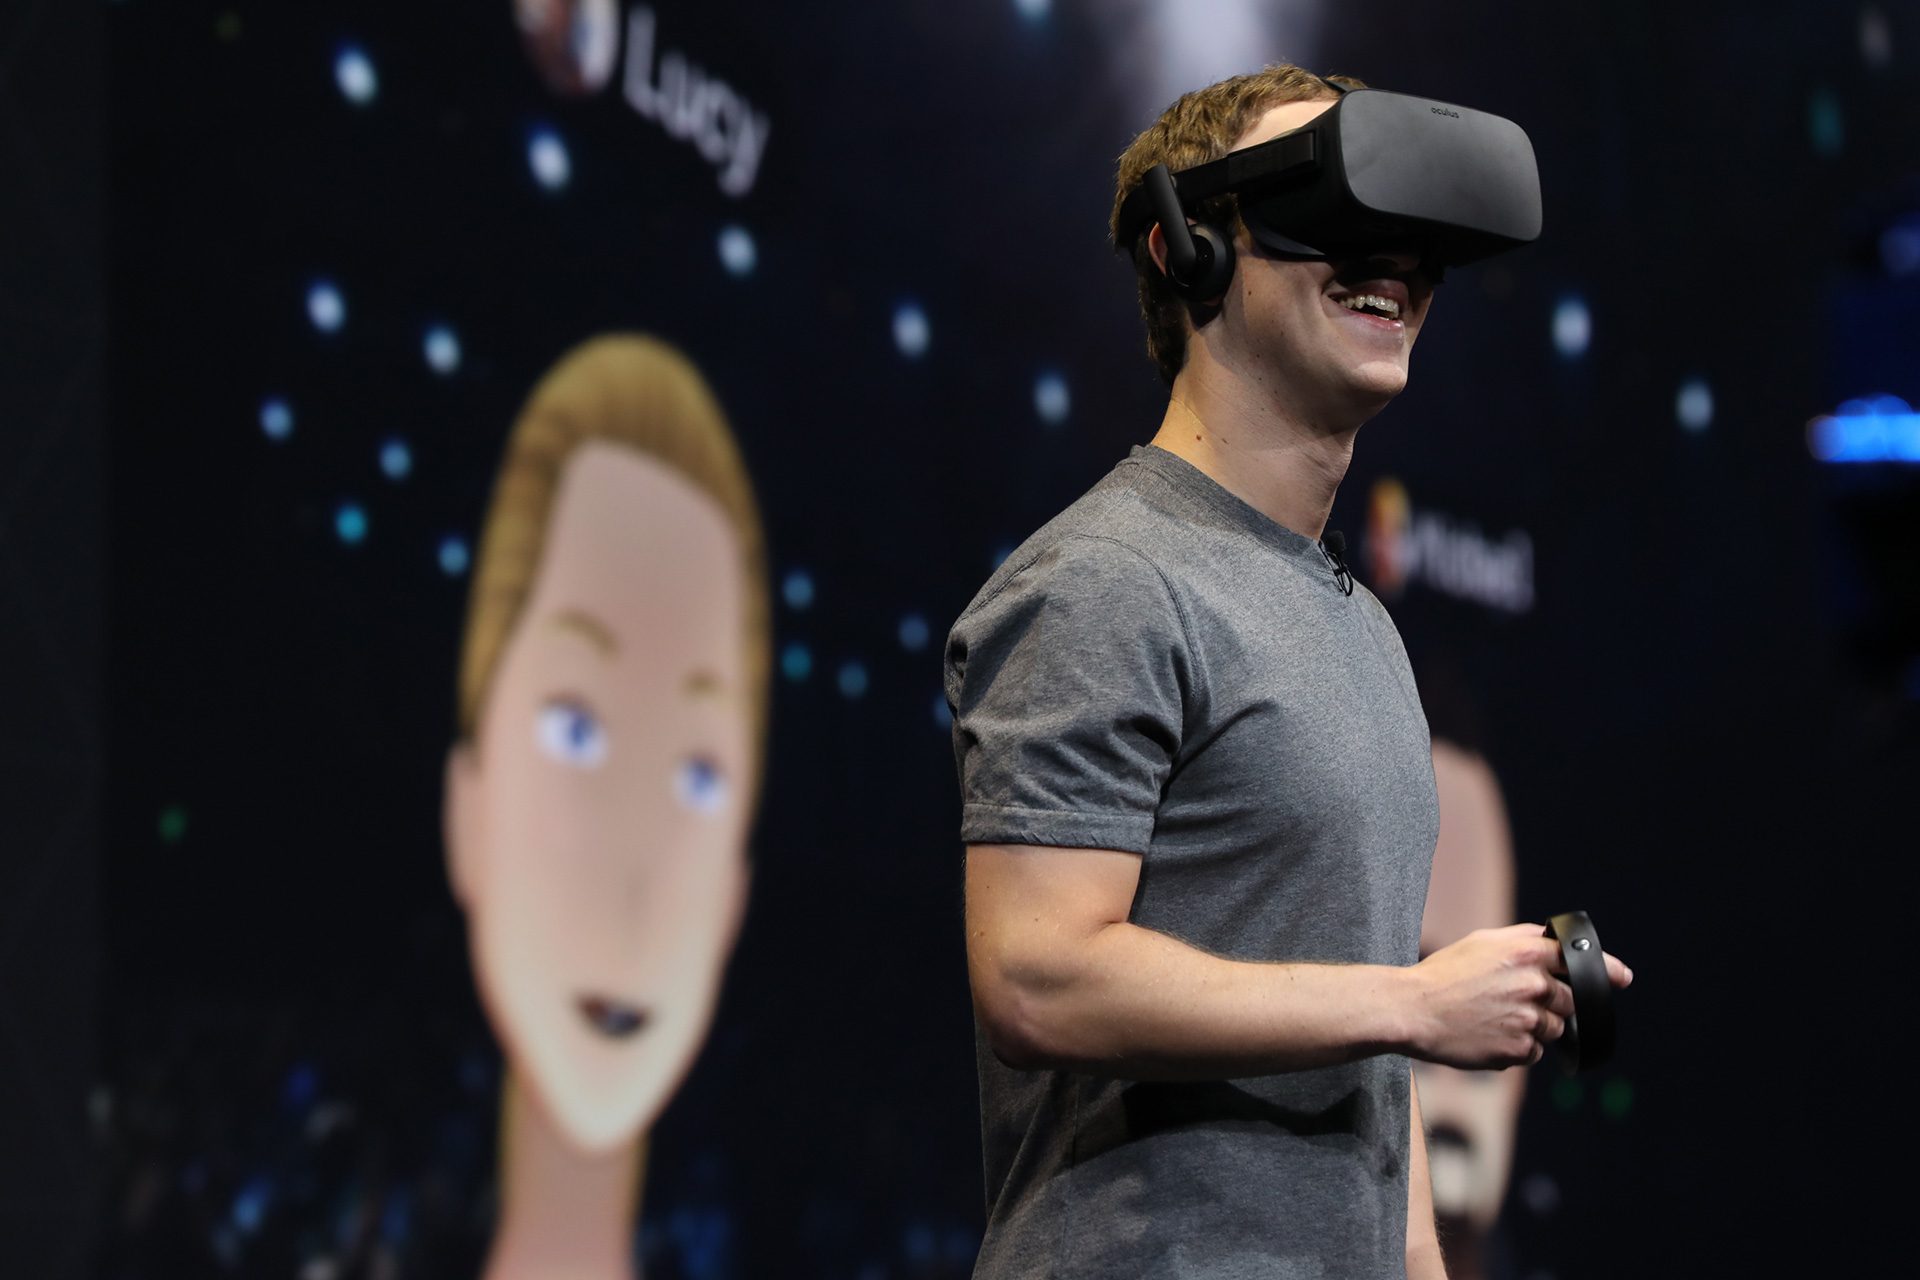 Facebook acquires virtual reality headset maker Oculus Rift for $2bn